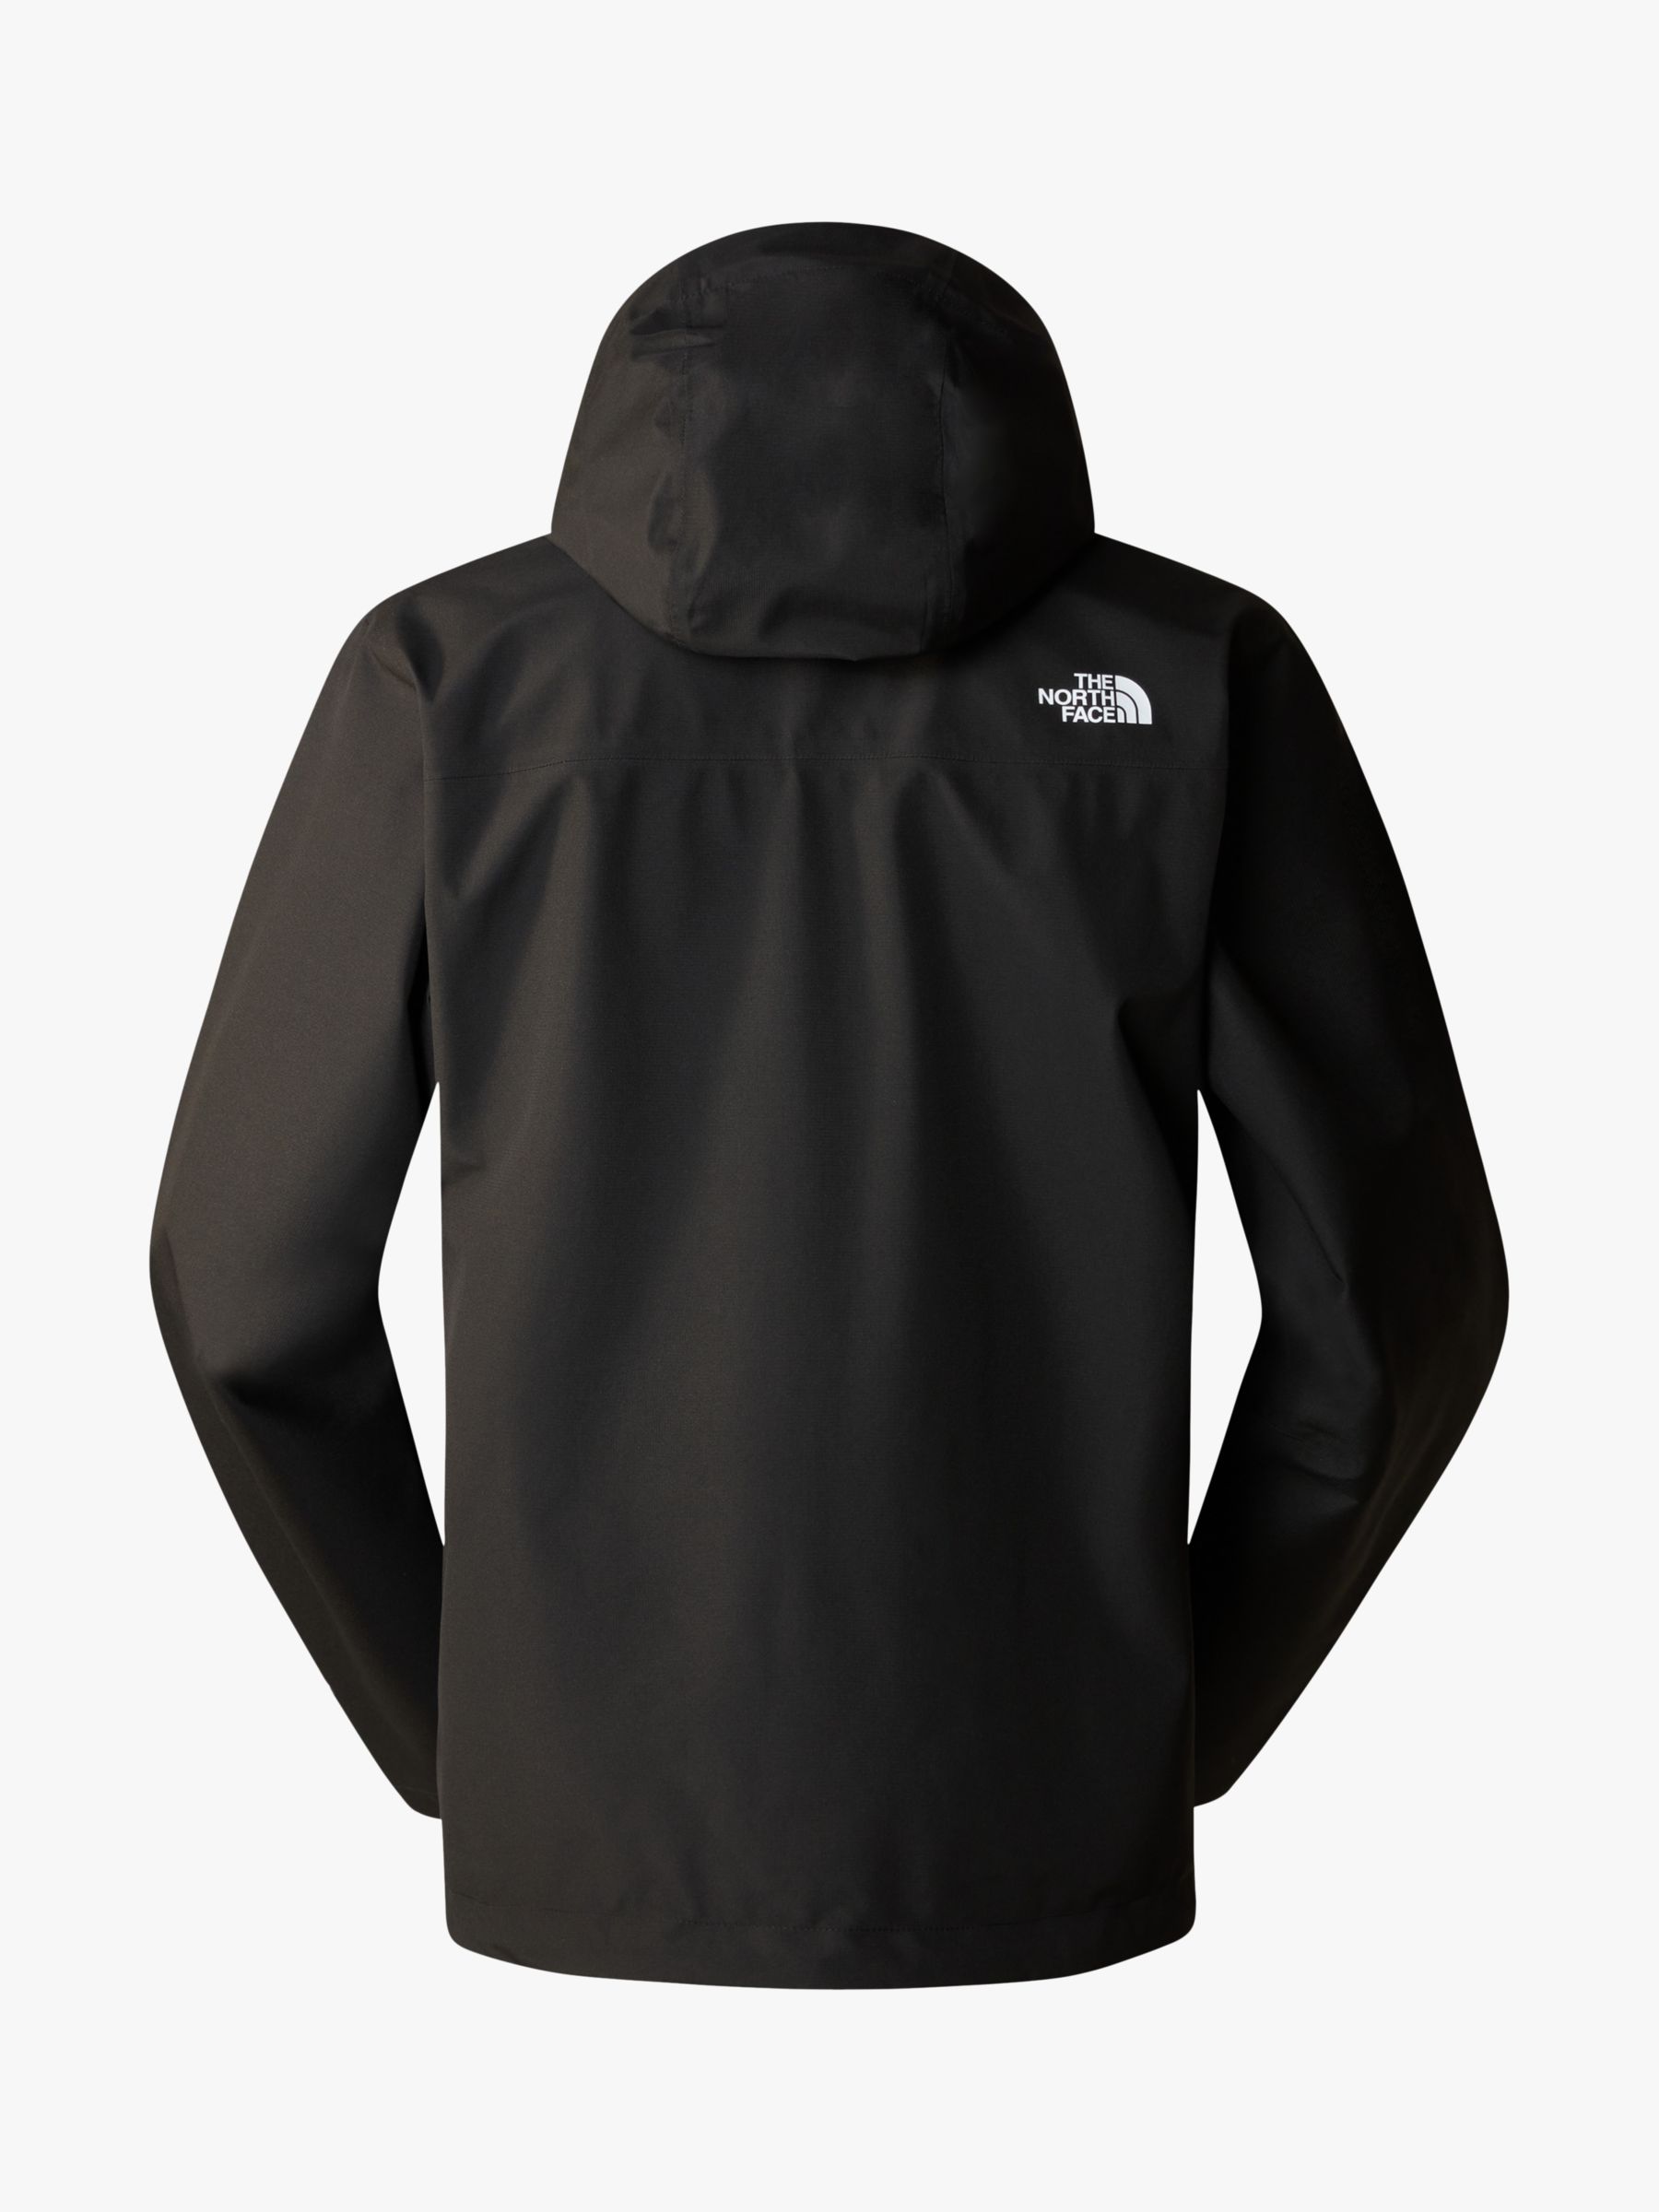 The North Face Whiton 3 Layer Jacket, Black at John Lewis & Partners